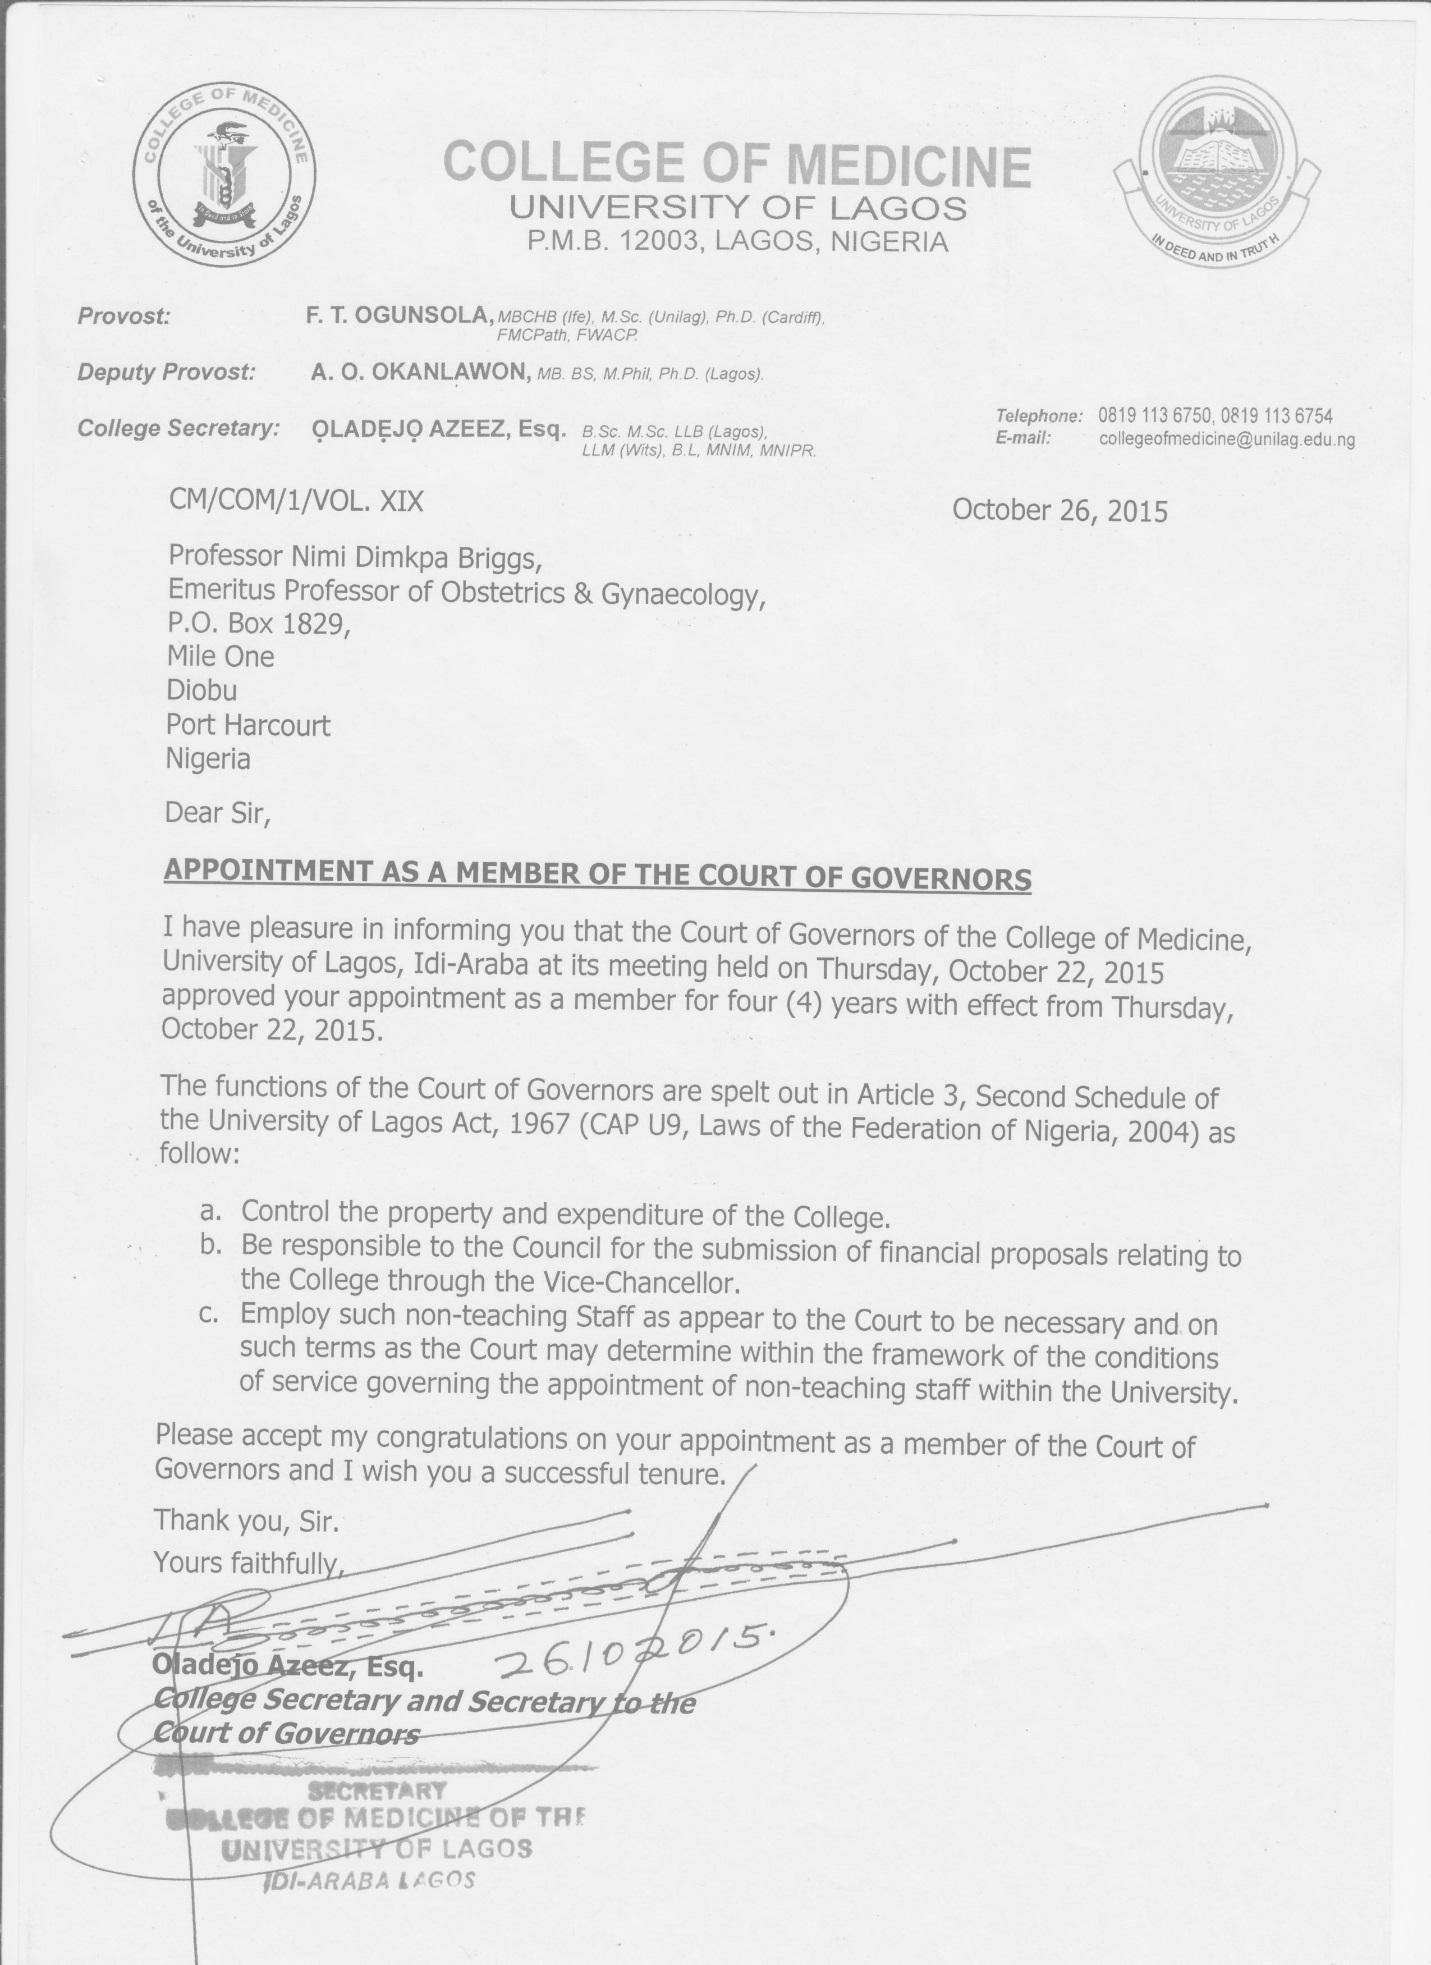 APPOINTMENT INTO THE COURT OF GOVERNORS, COLLEGE OF MEDICINE, UNIVERSITY OF LAGOS